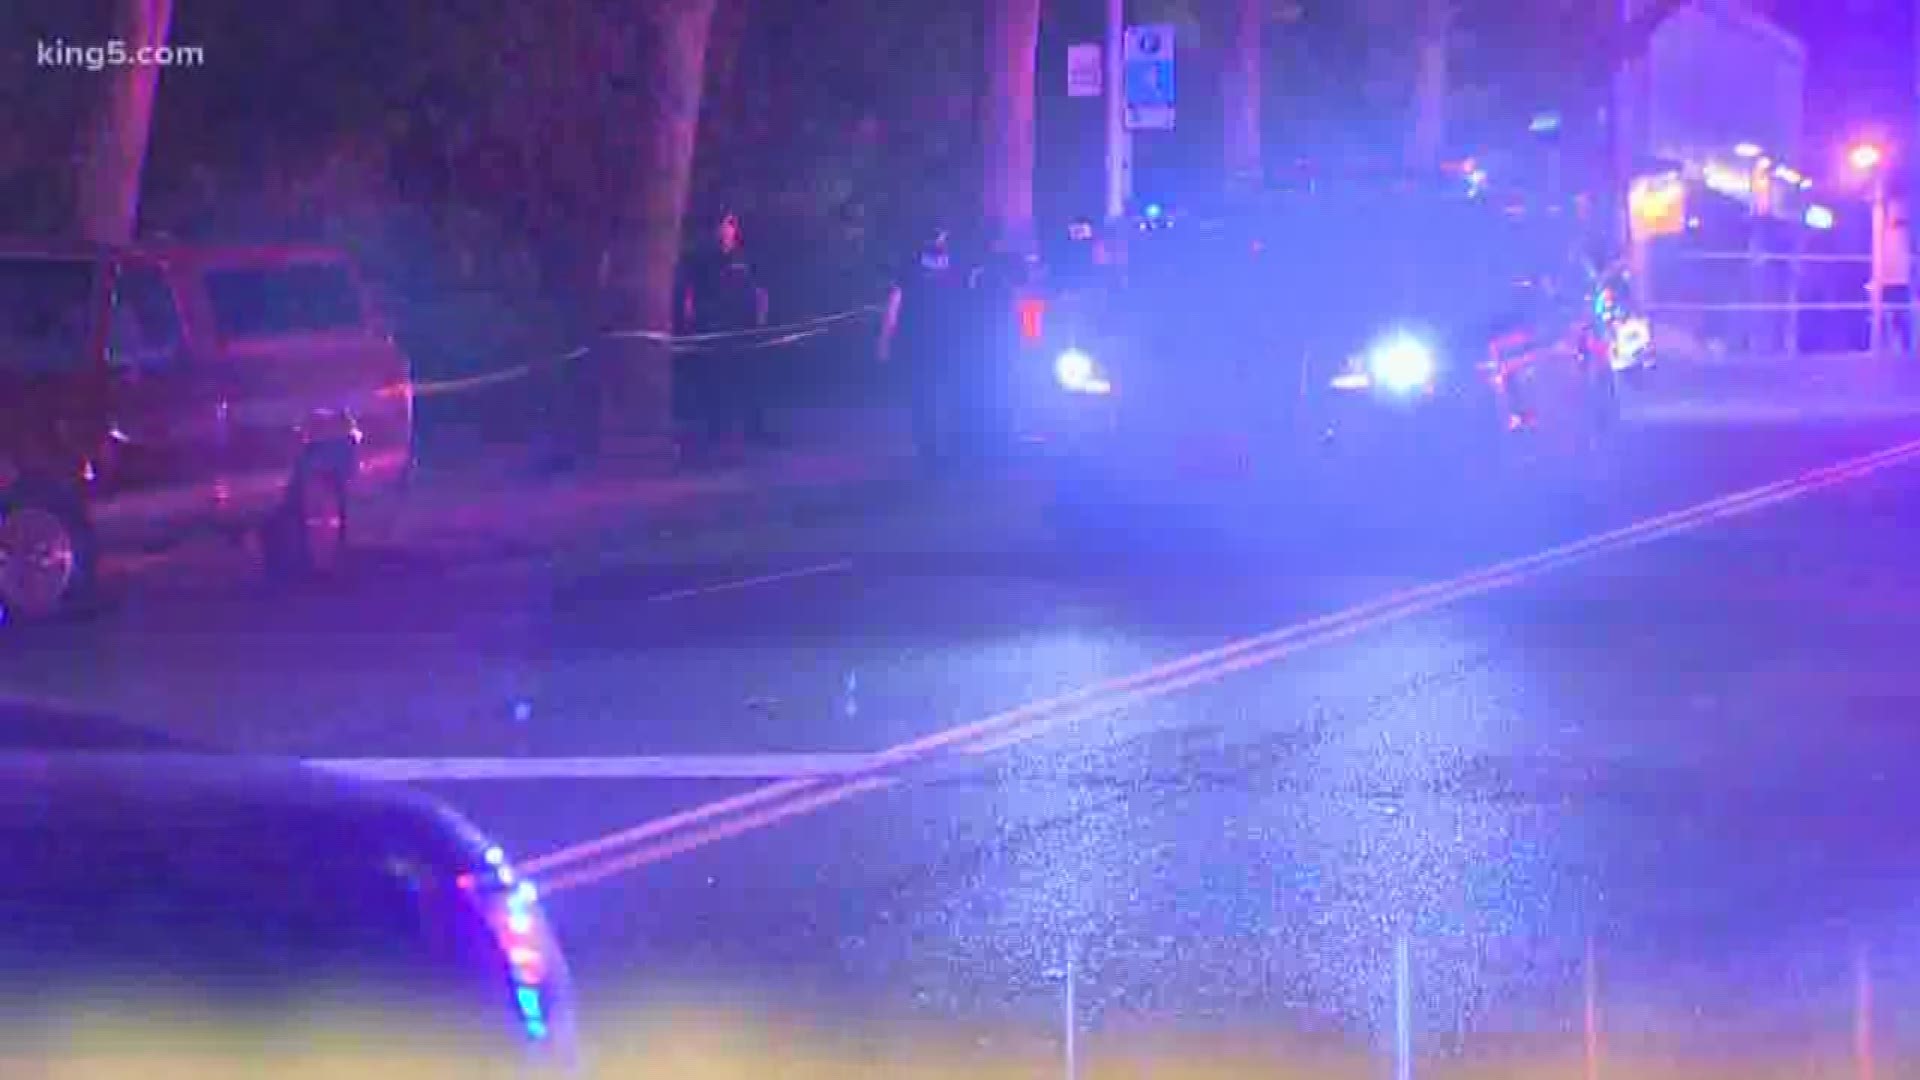 One man is in custody and another man has life threatening injuries after being shot in a large disturbance near the Seattle Center early Sunday.